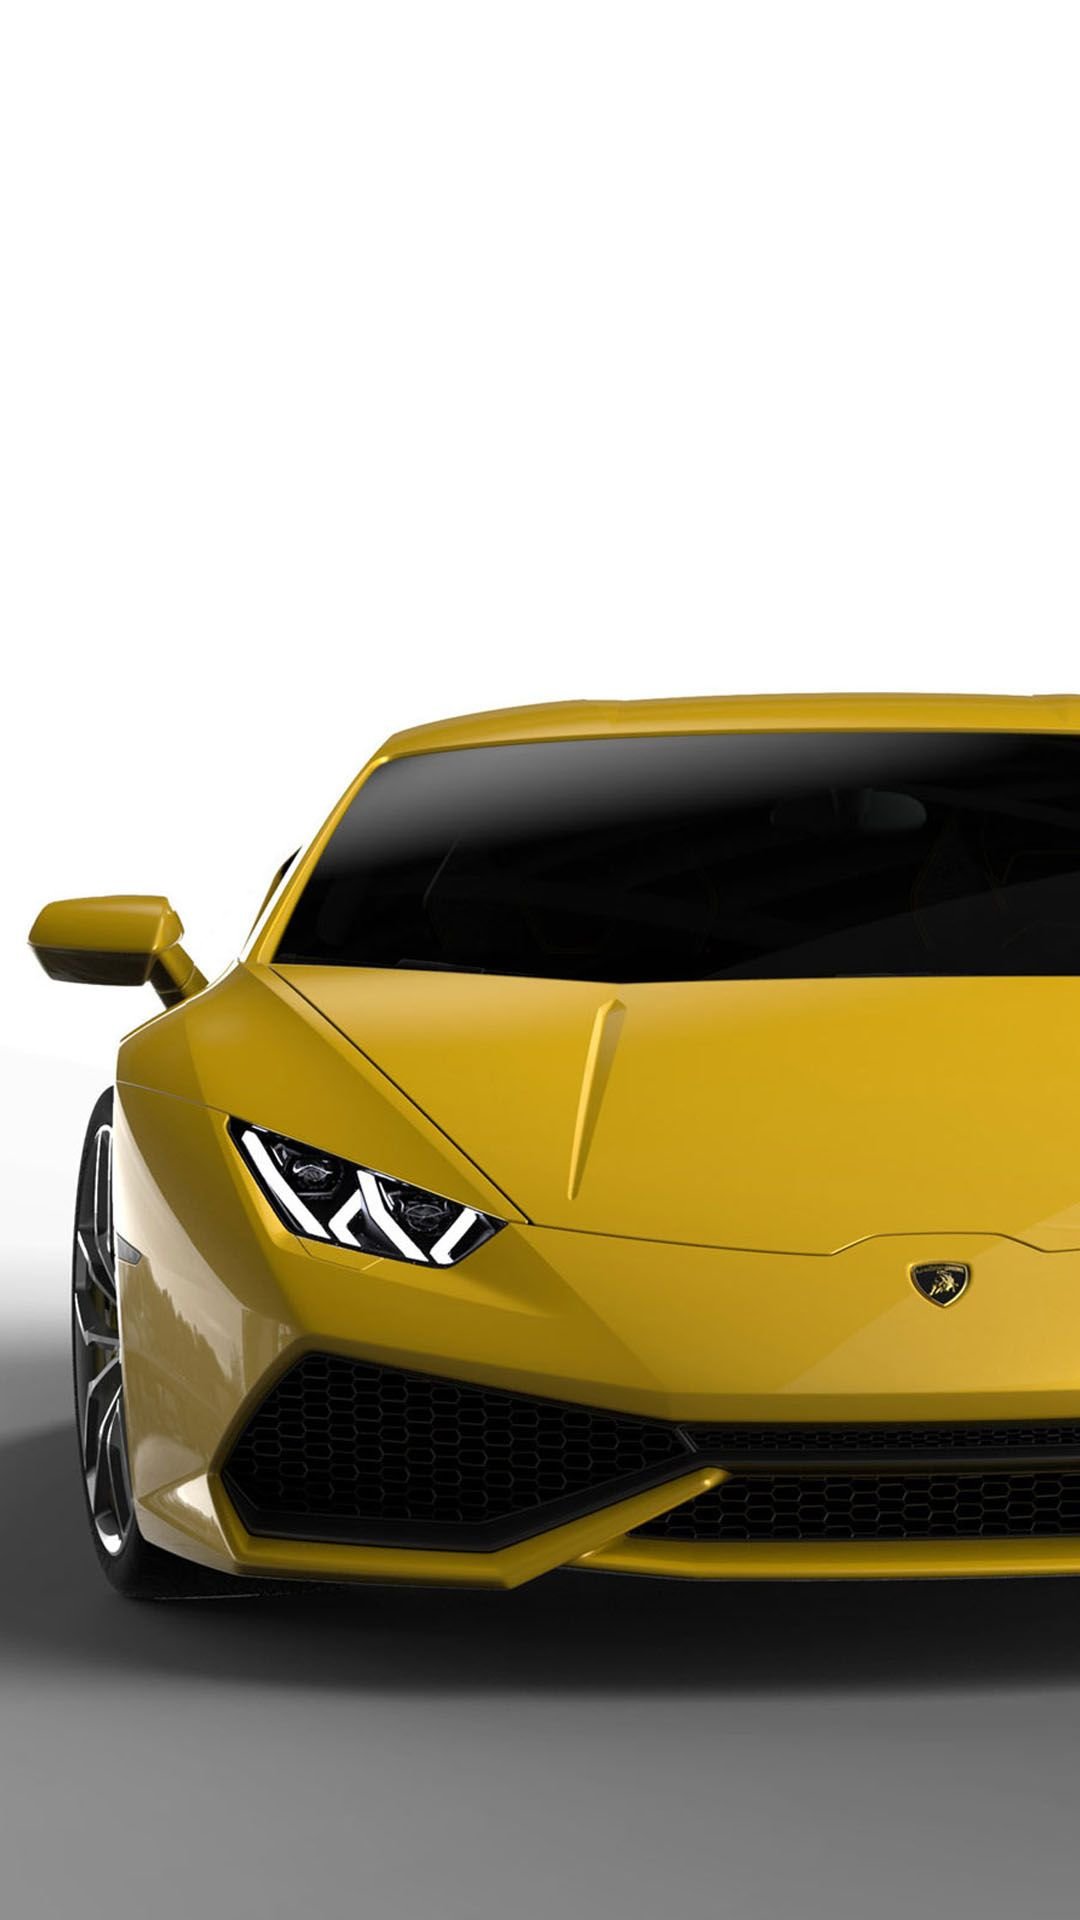 Lamborghini Cell cool wallpapers for iPhone 6